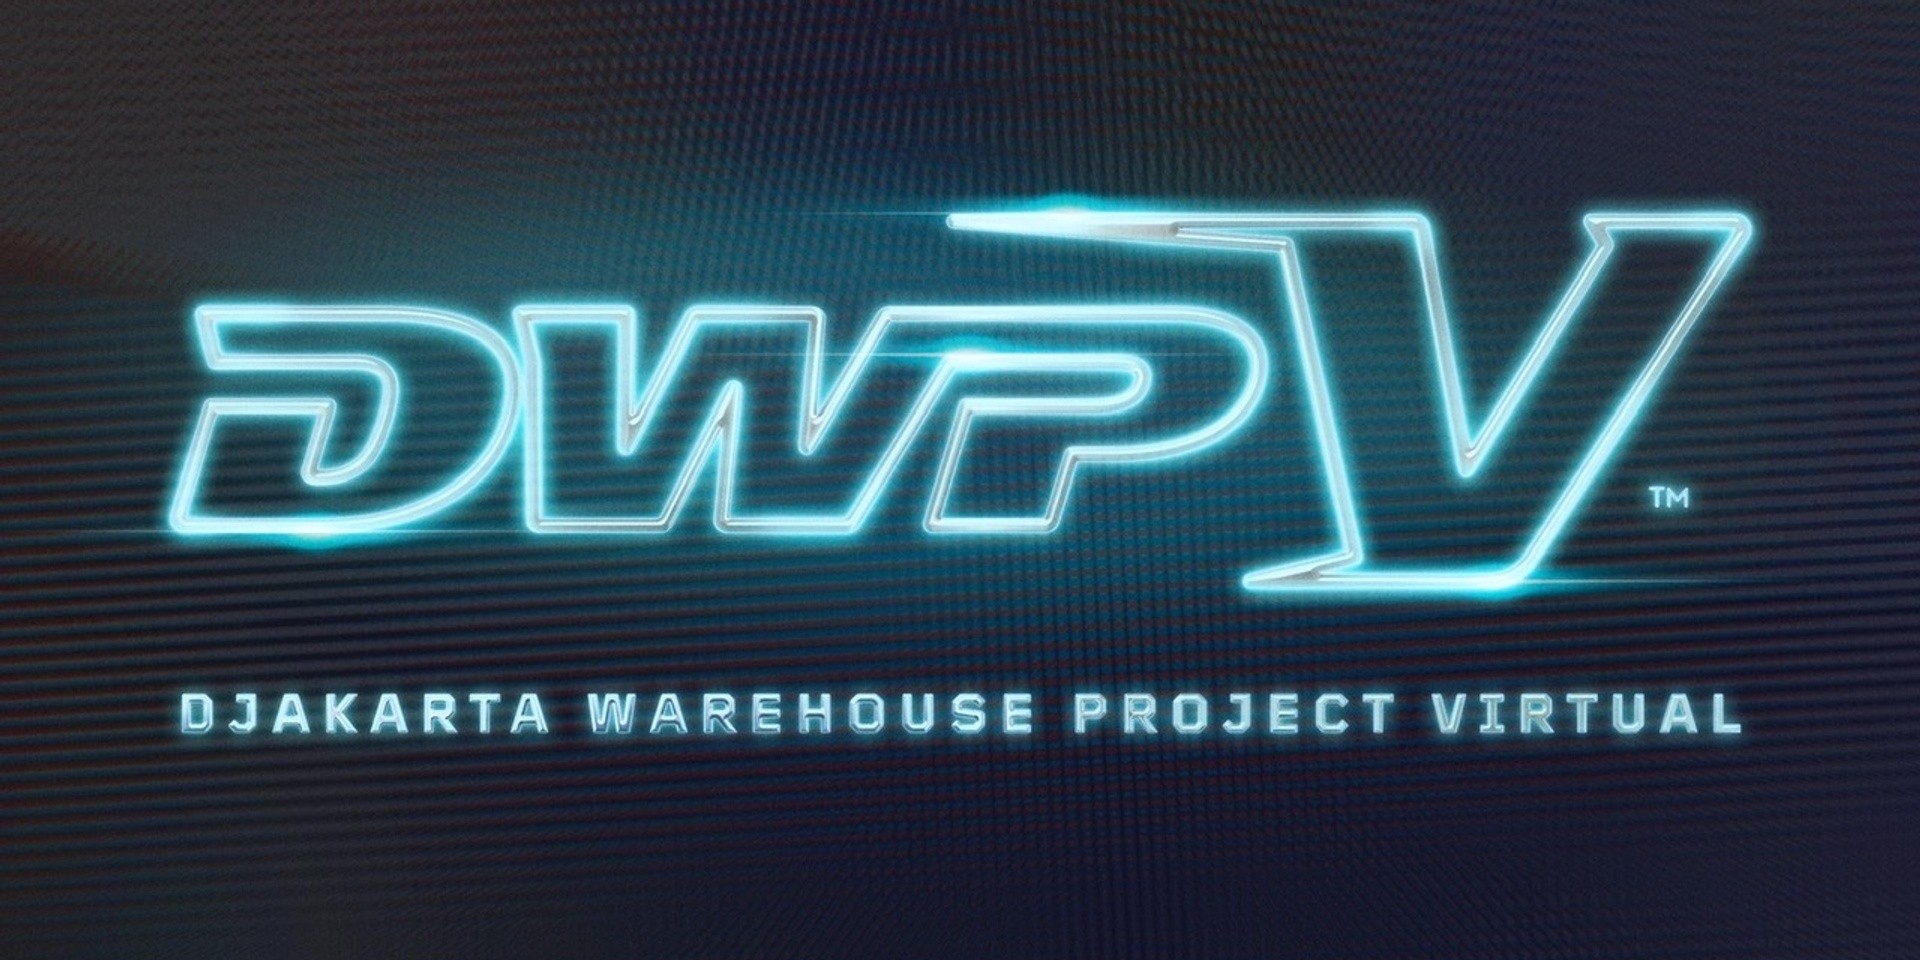 Djakarta Warehouse Project is going virtual this December 2020